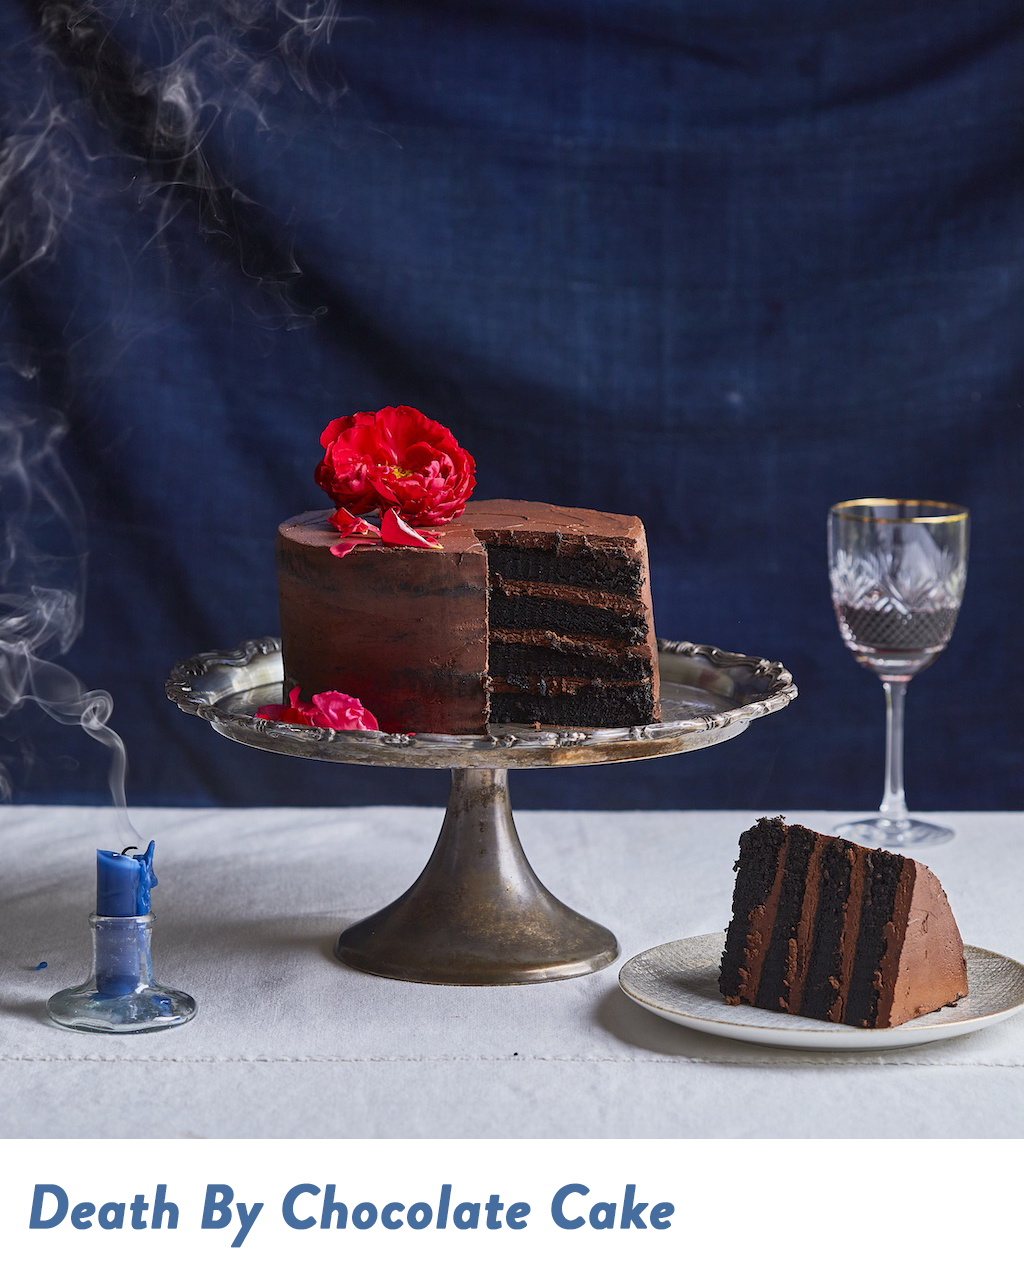 Death By Chocolate Cake next to a candle and slice